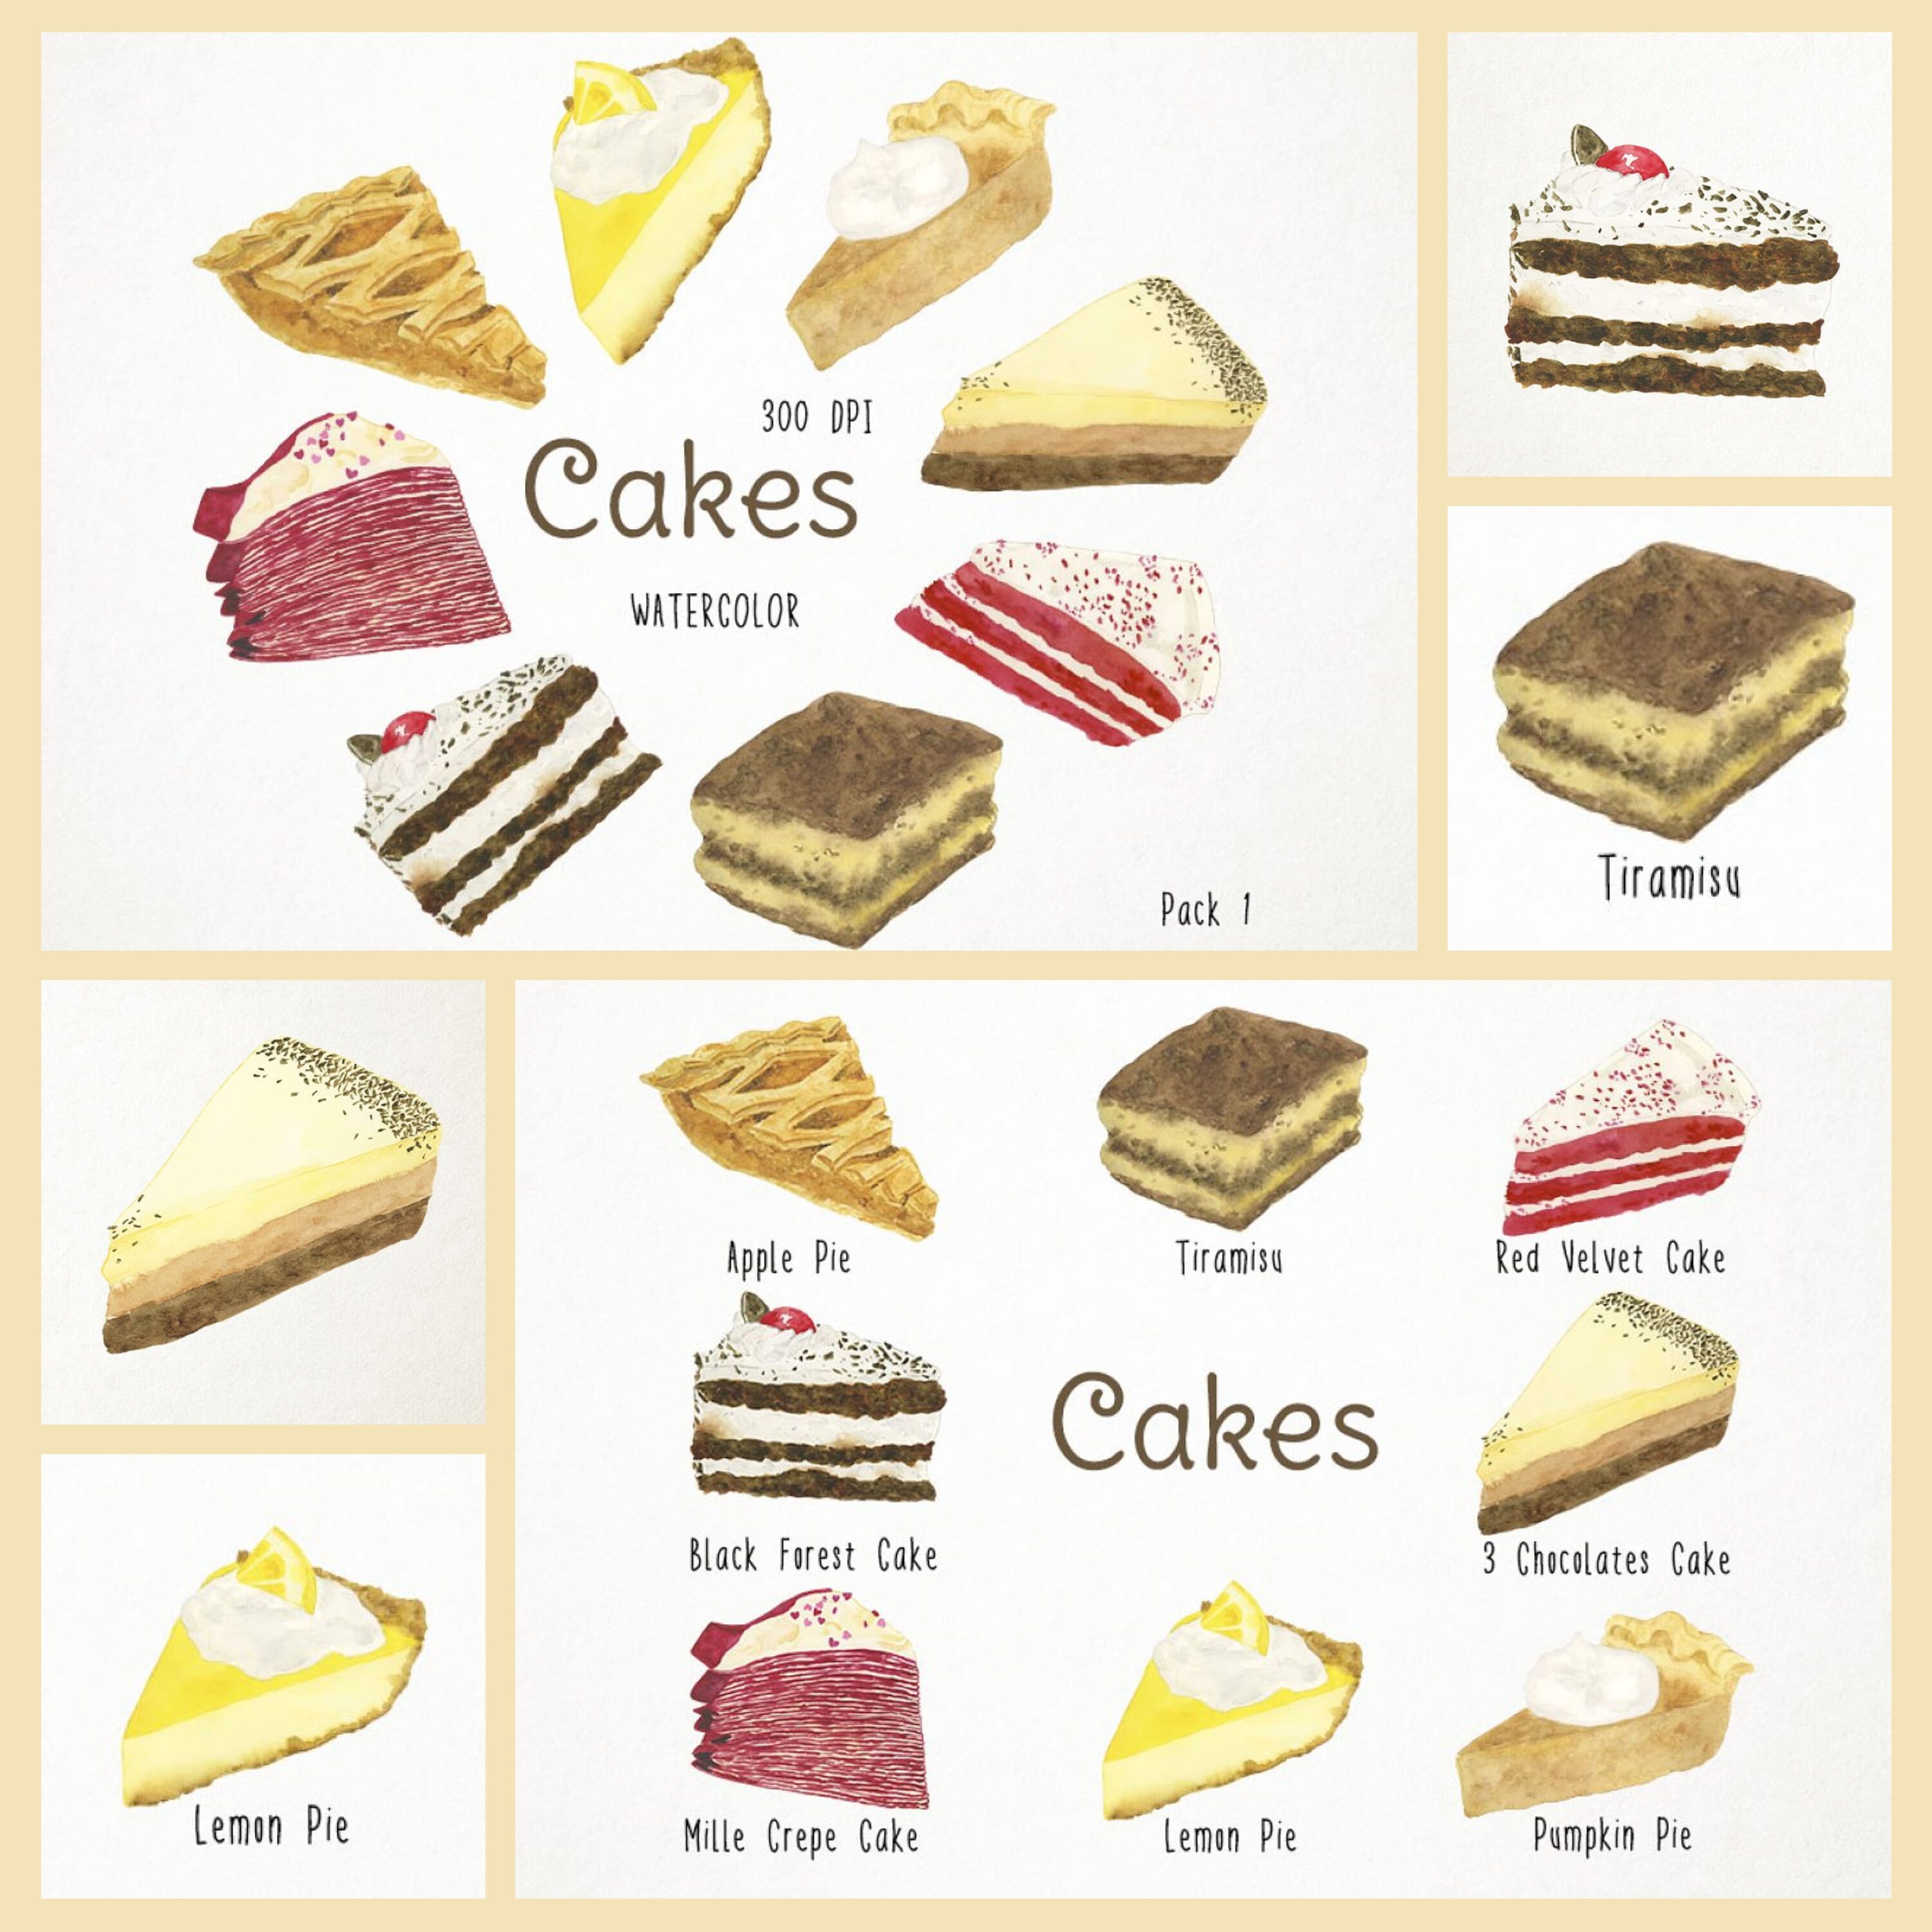 Cakes Clipart Pack 1 cover.